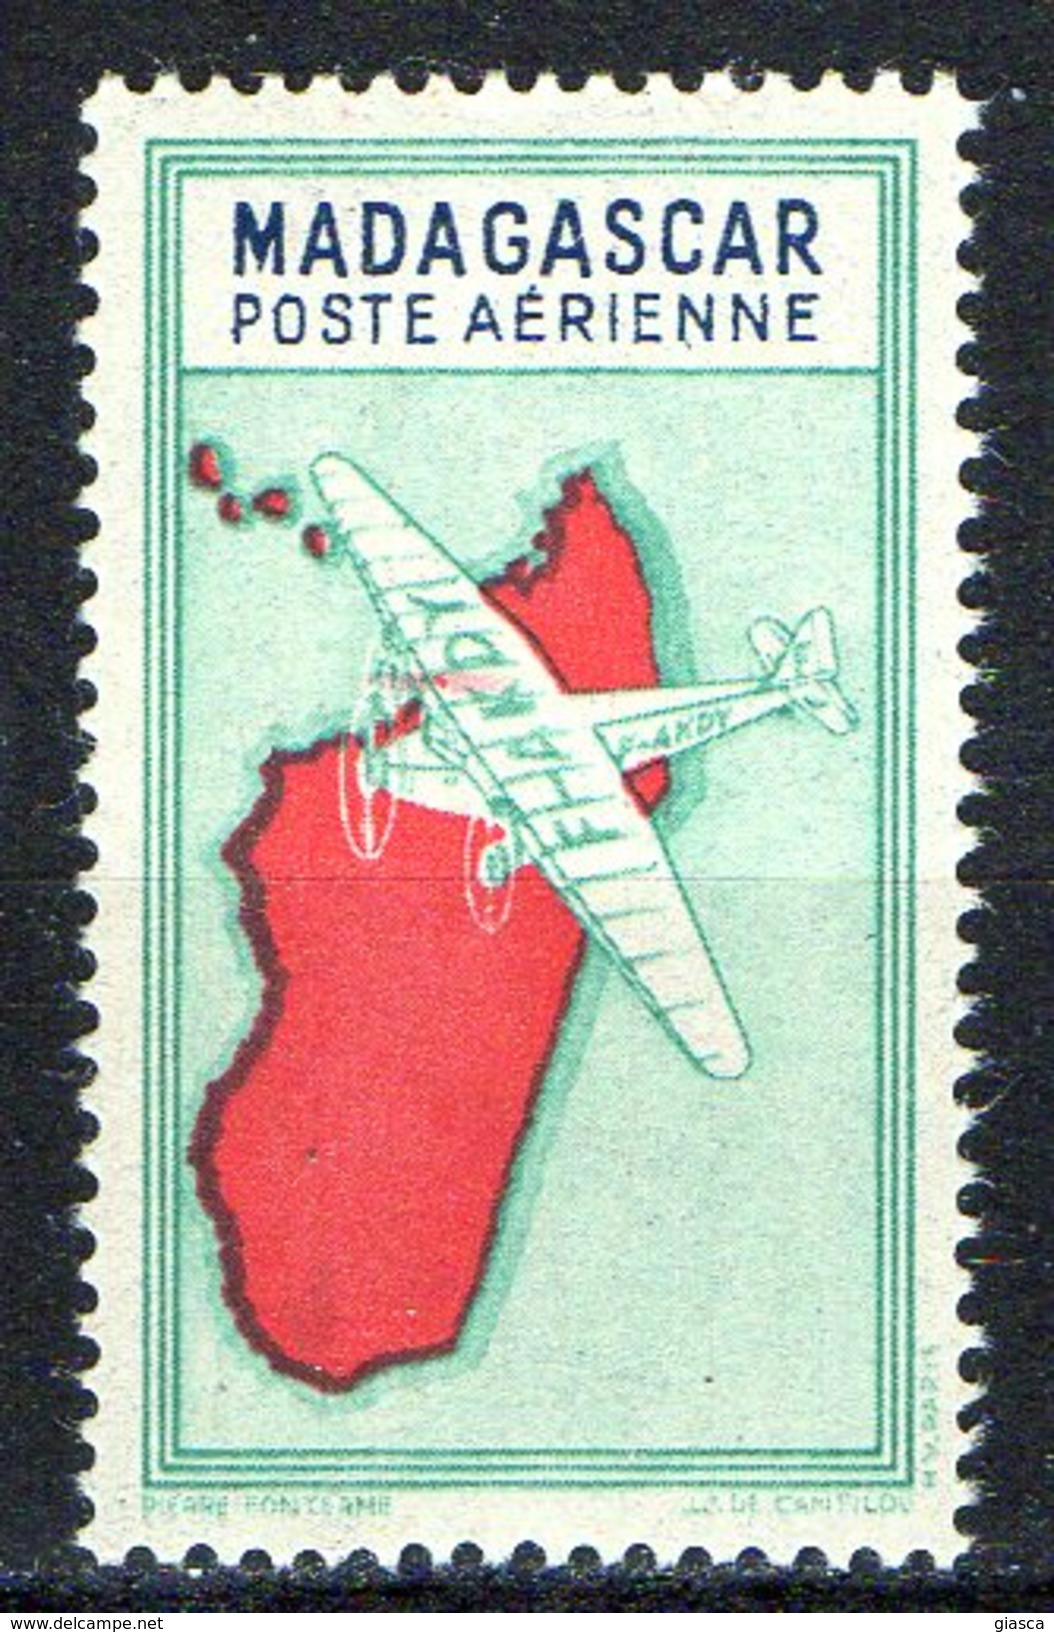 MADAGASCAR : S021  -  1942  MNH  Air Mail 2 F. : Without Value  -  Yvert  €  35 - Airmail